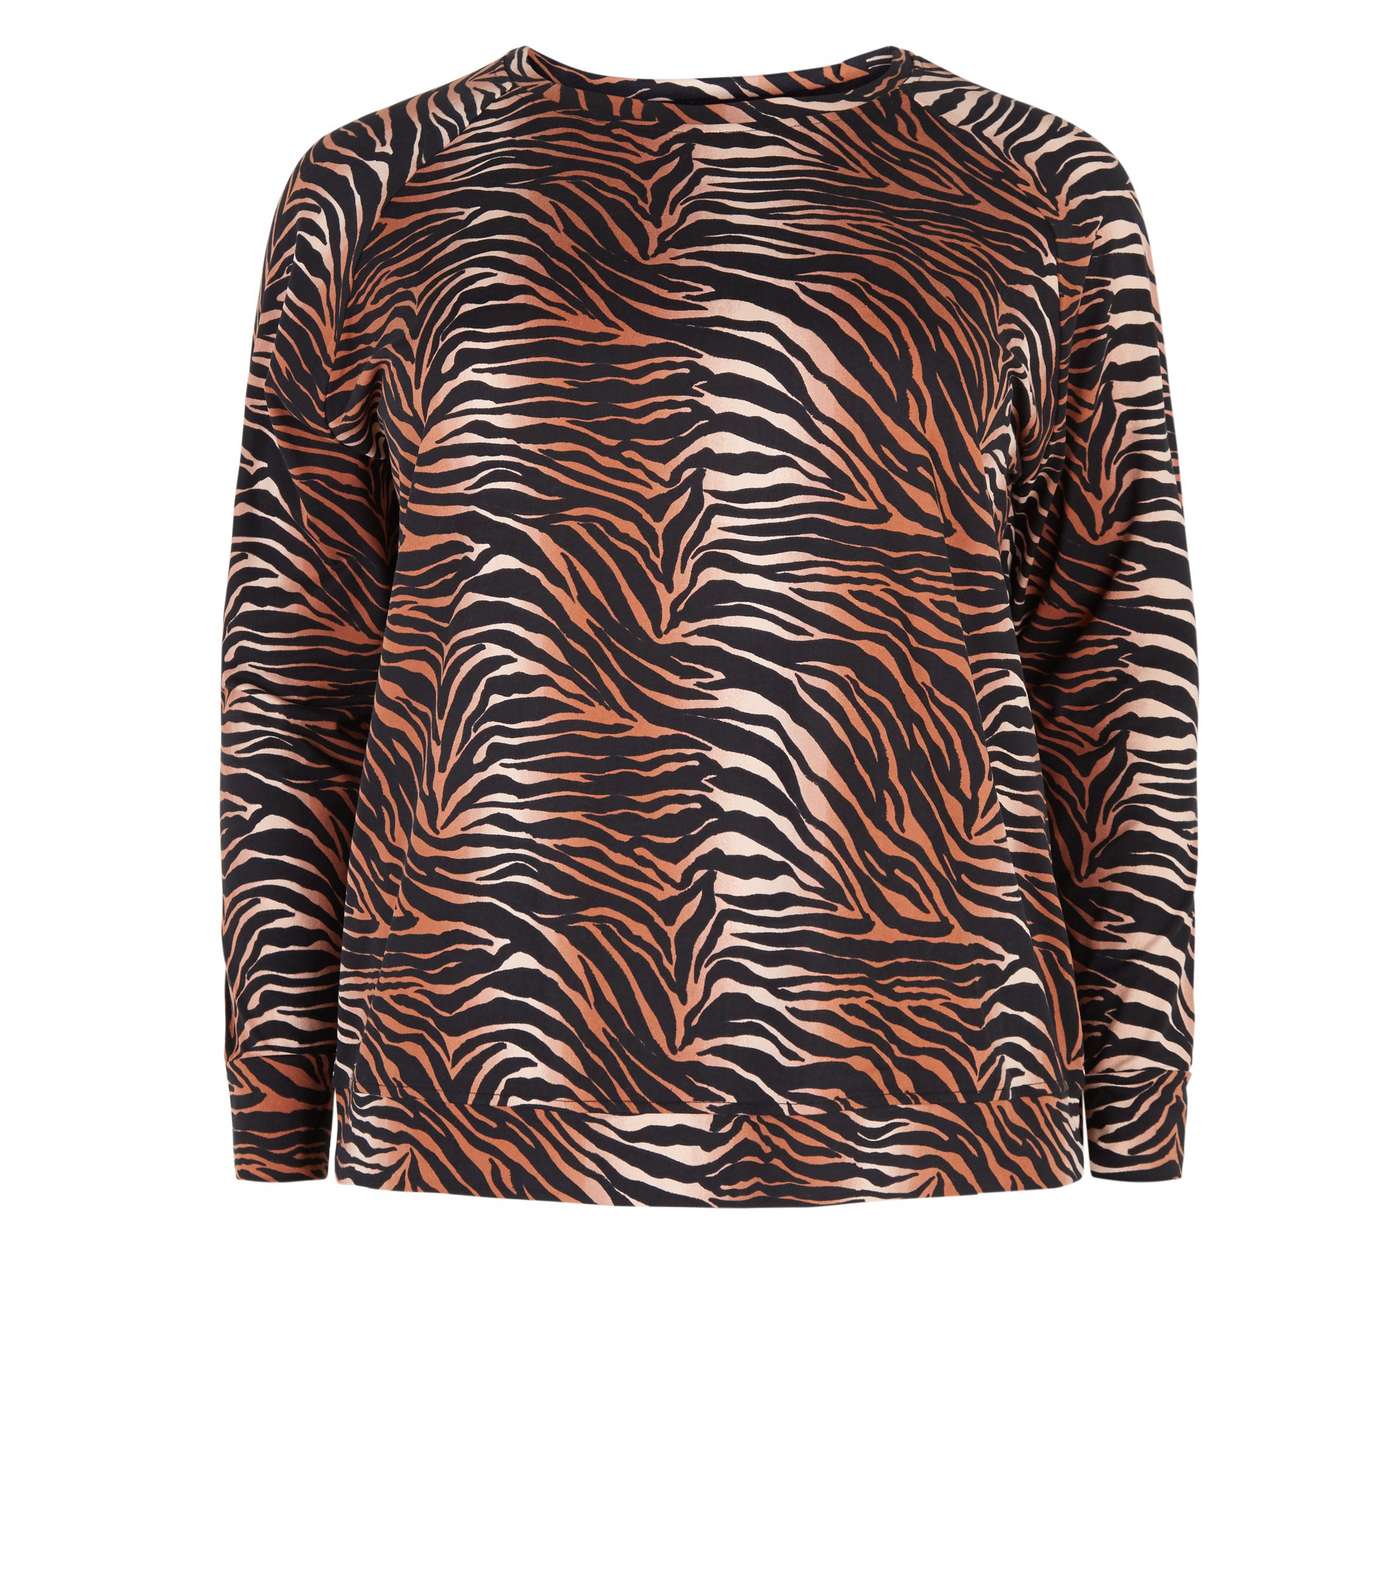 Curves Brown Tiger Print Soft Touch Sweatshirt Image 4